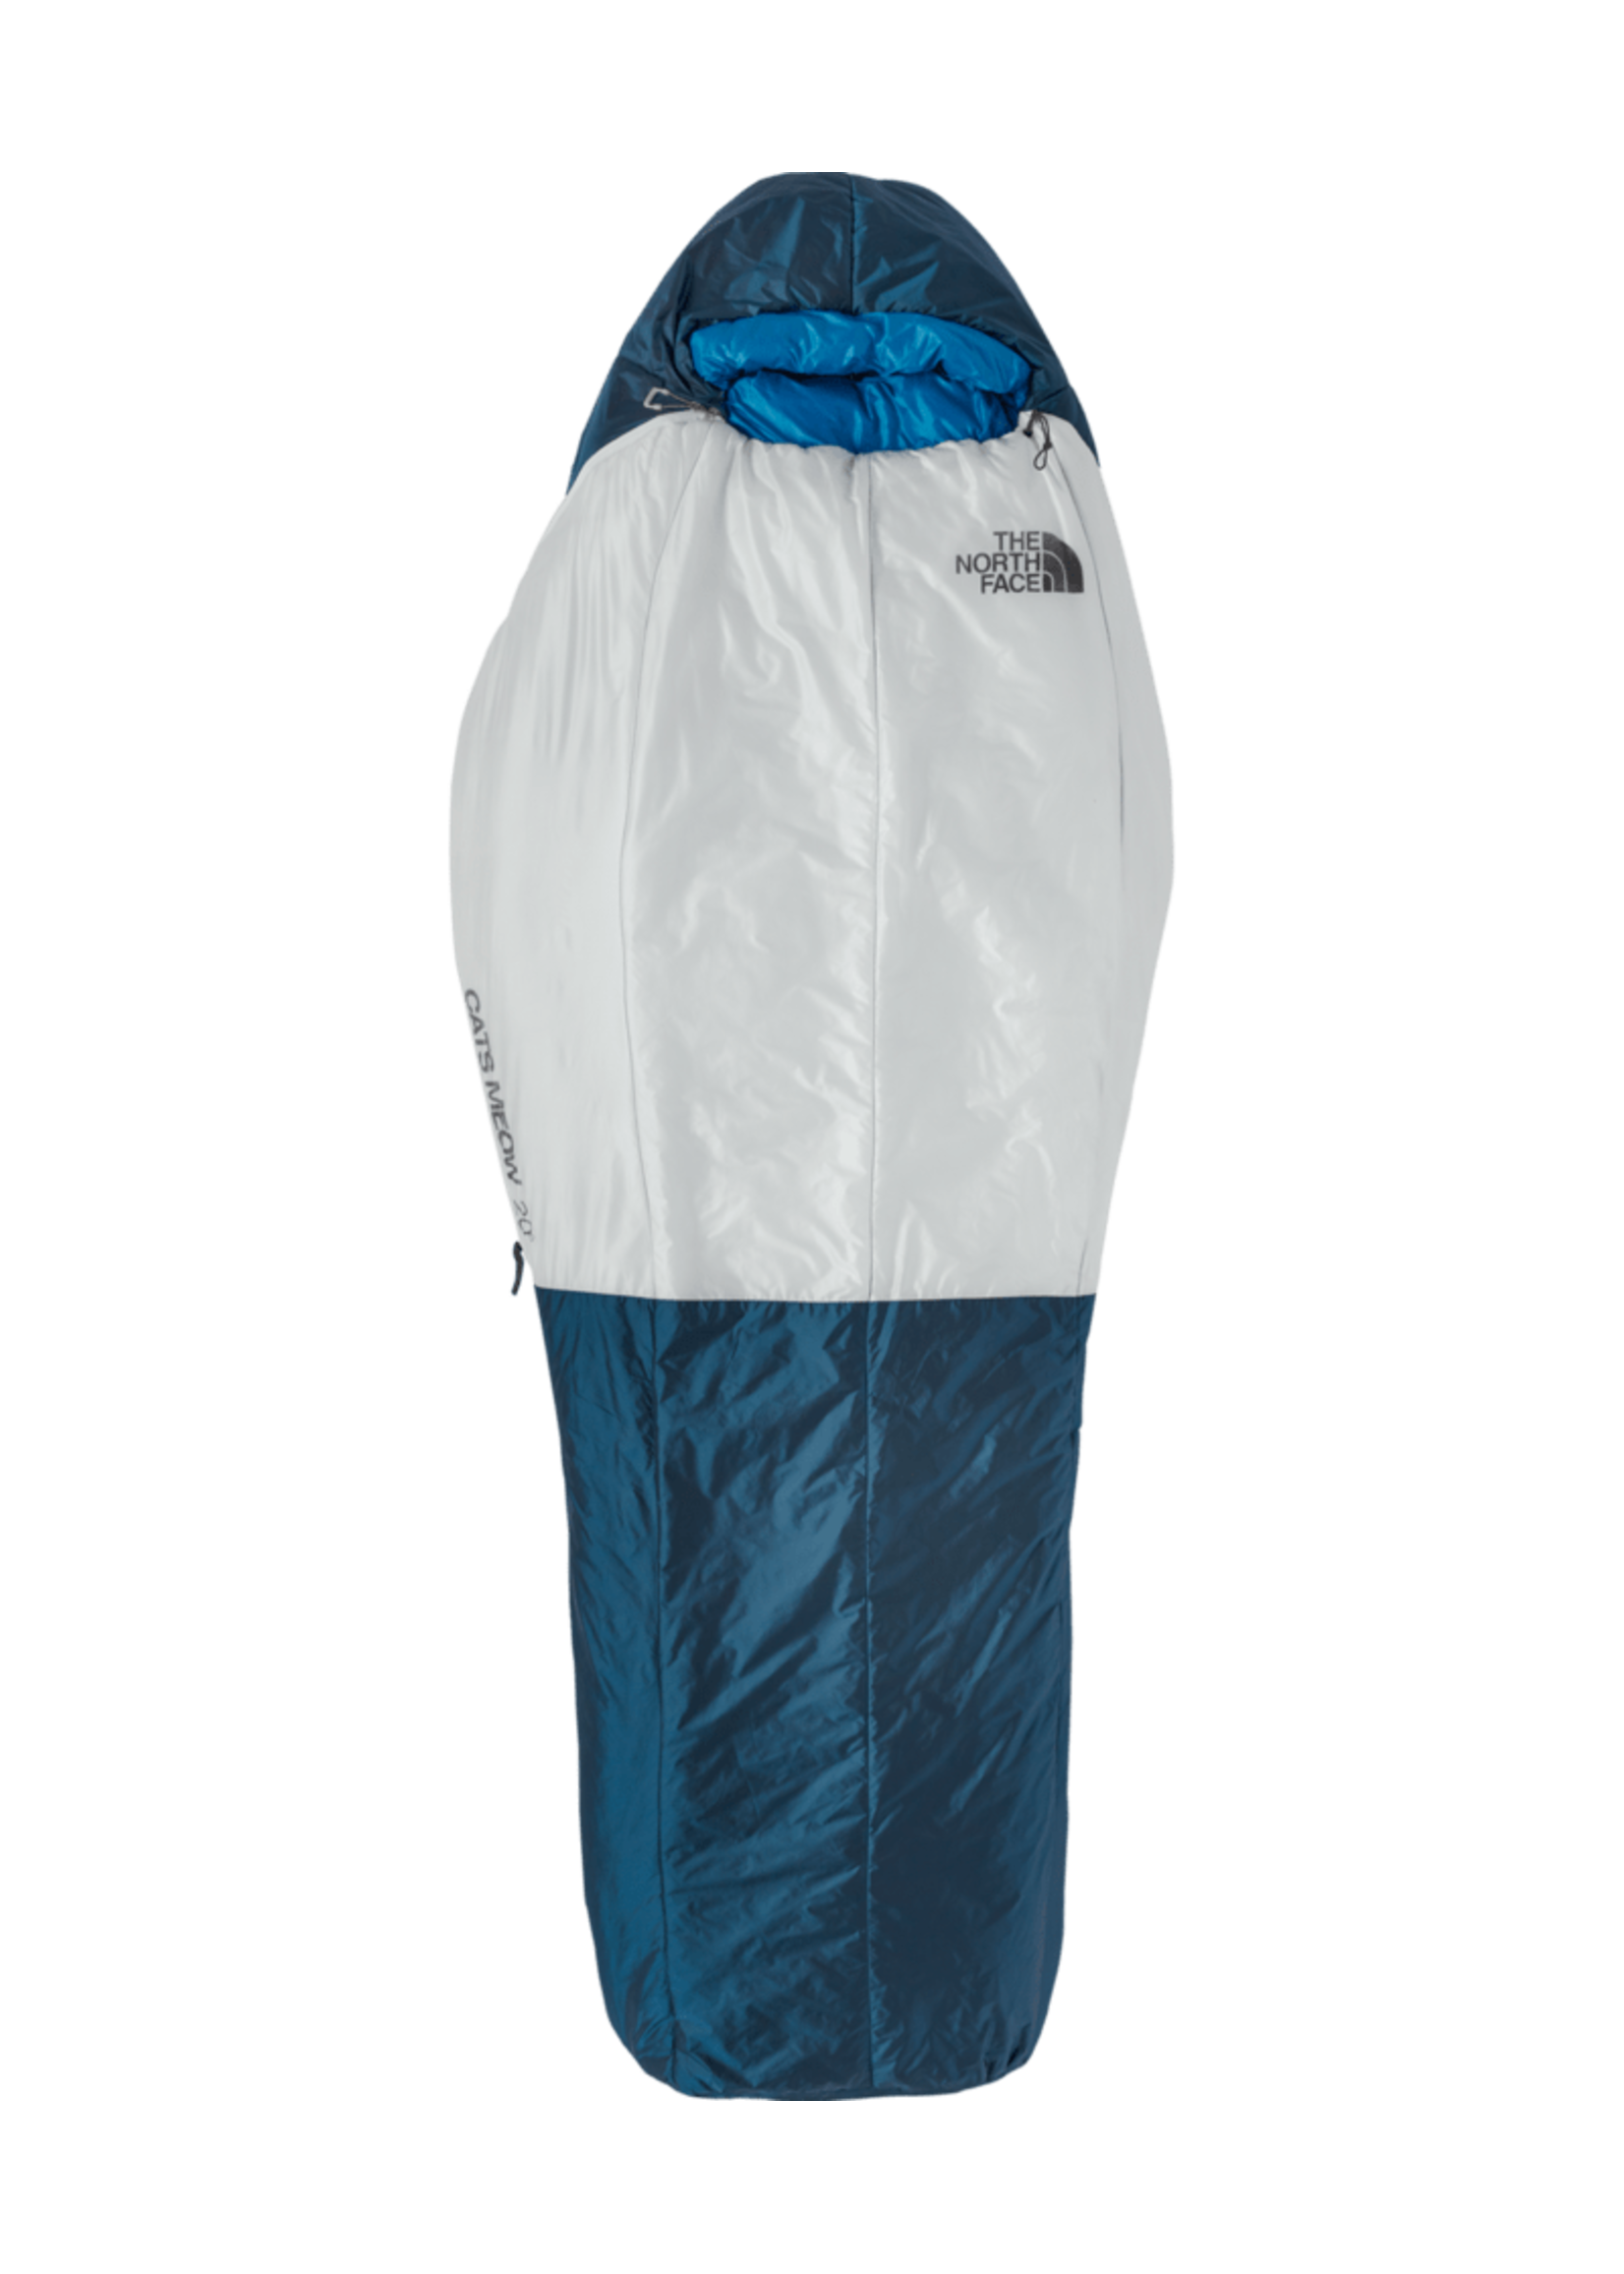 The North Face Cat's Meow 20-degree Sleeping Bag - Blue/Grey